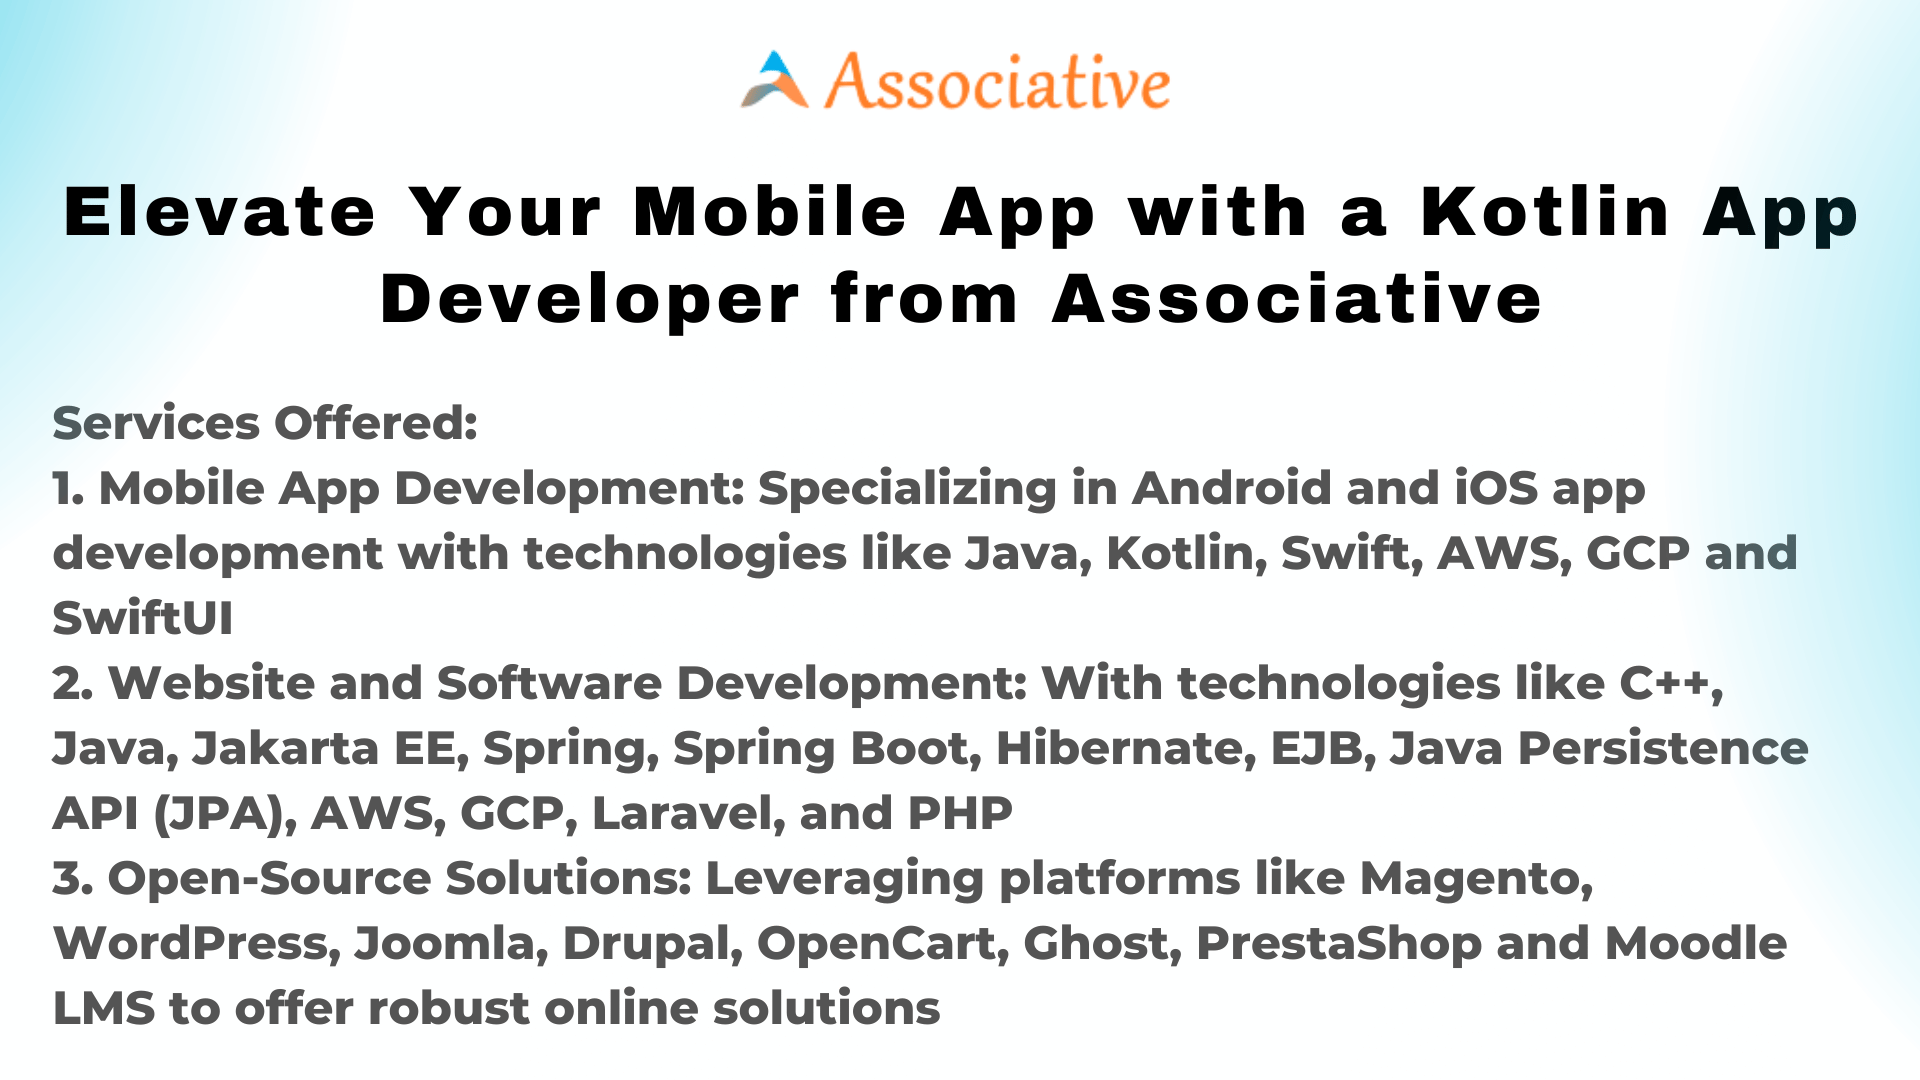 Elevate Your Mobile App with a Kotlin App Developer from Associative